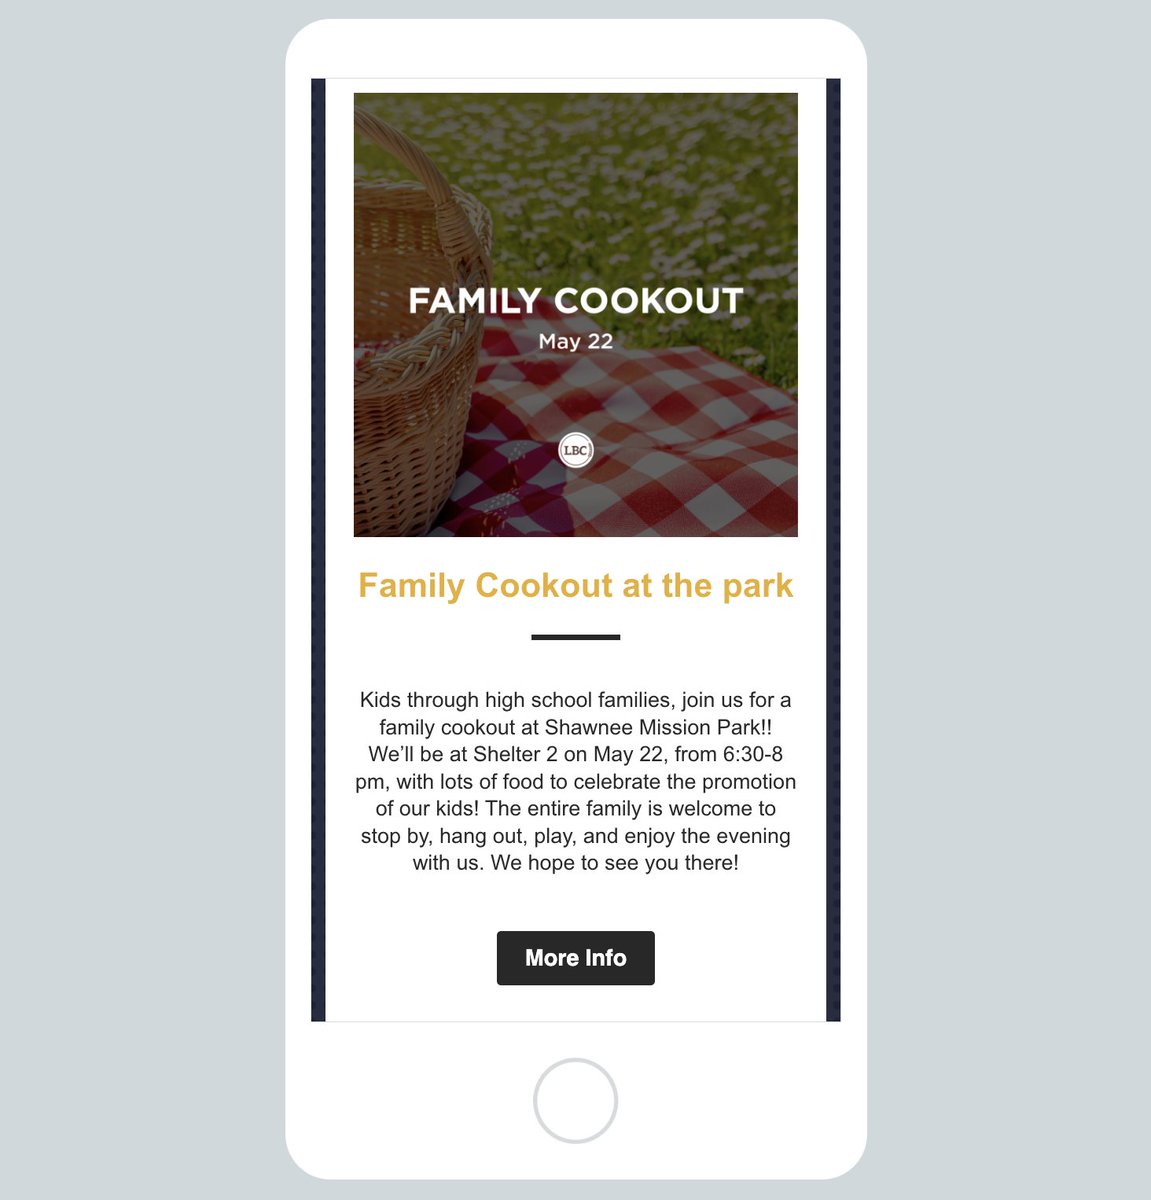 Family Cookout, Promotion Sunday and more! Check out this week's Email here:
conta.cc/3WNypGw

You can receive this in your Inbox each week by subscribing at the bottom of our website's homepage:
LenexaBaptist.com

#ReachTeachUnleash
#ThisWeekAtLBC